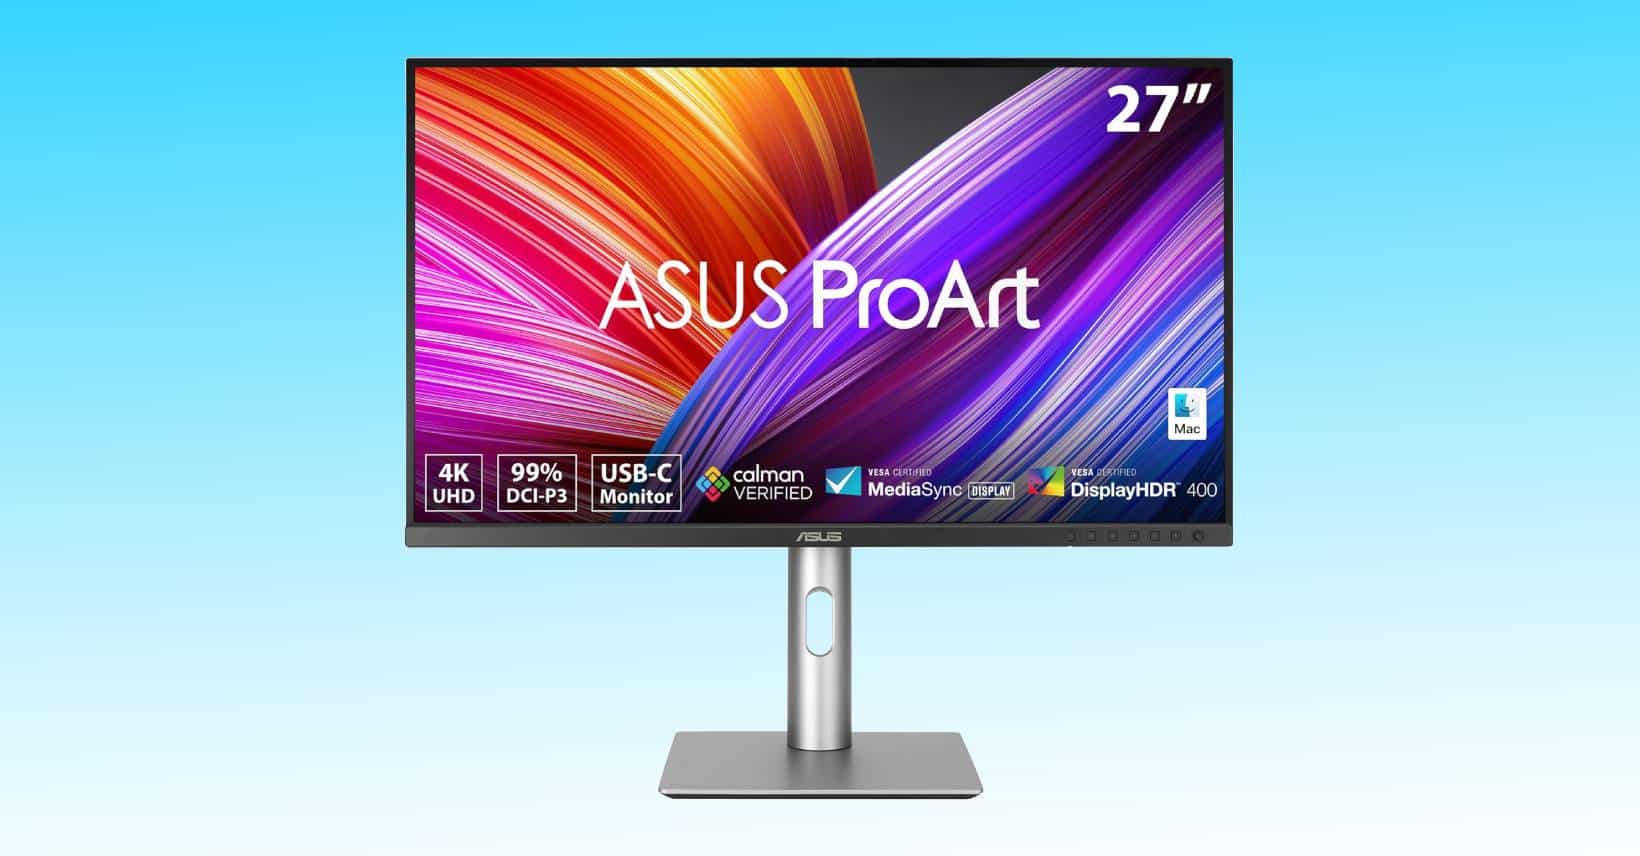 https://www.pcguide.com/wp-content/uploads/2023/11/Black-Friday-deal-sees-the-27-inch-ASUS-ProArt-Display-take-a-big-price-cut.jpg